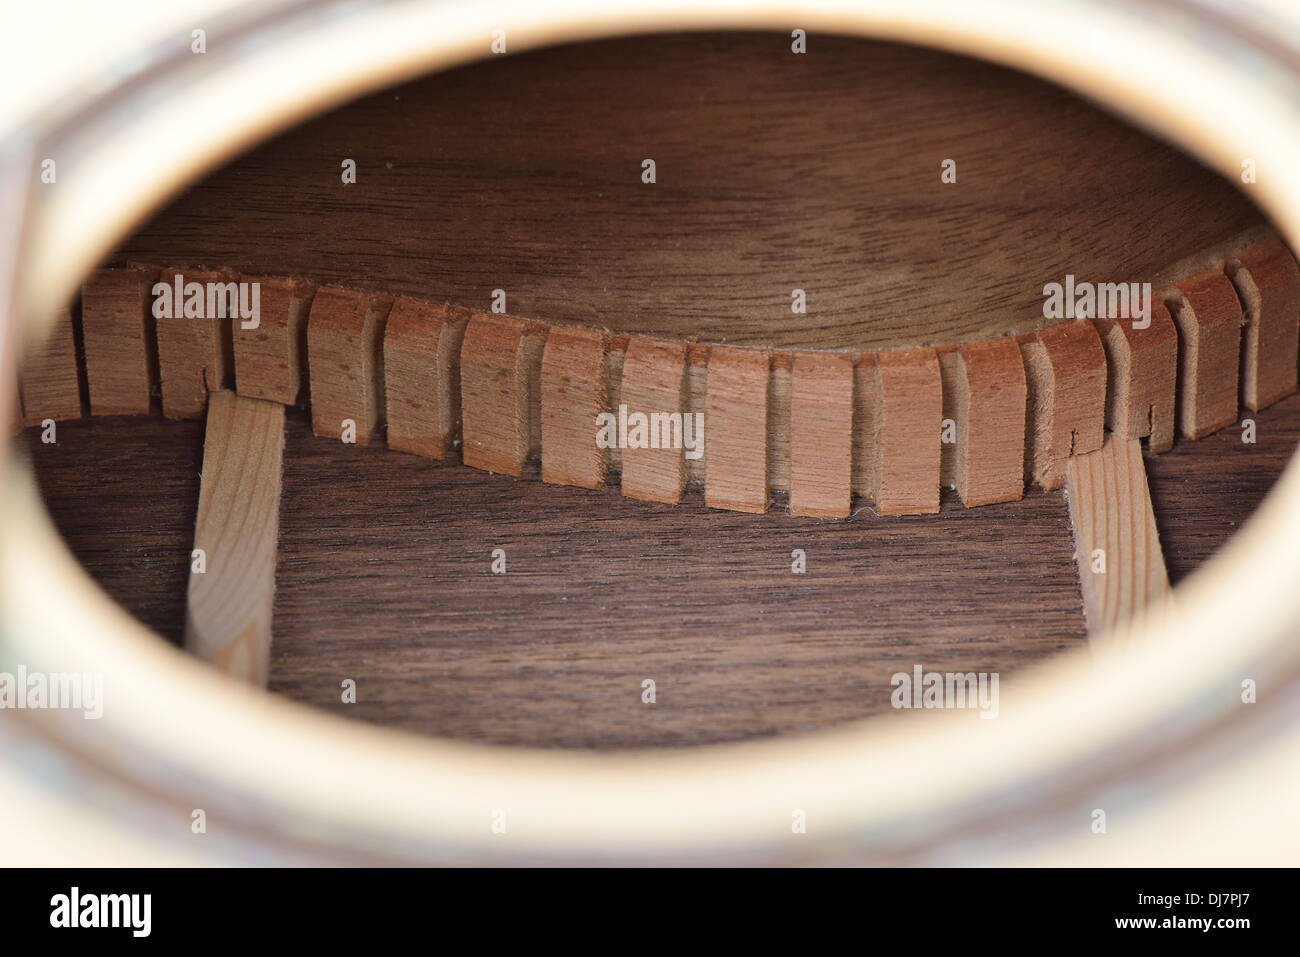 inner Lining of acoustic guitar Stock Photo